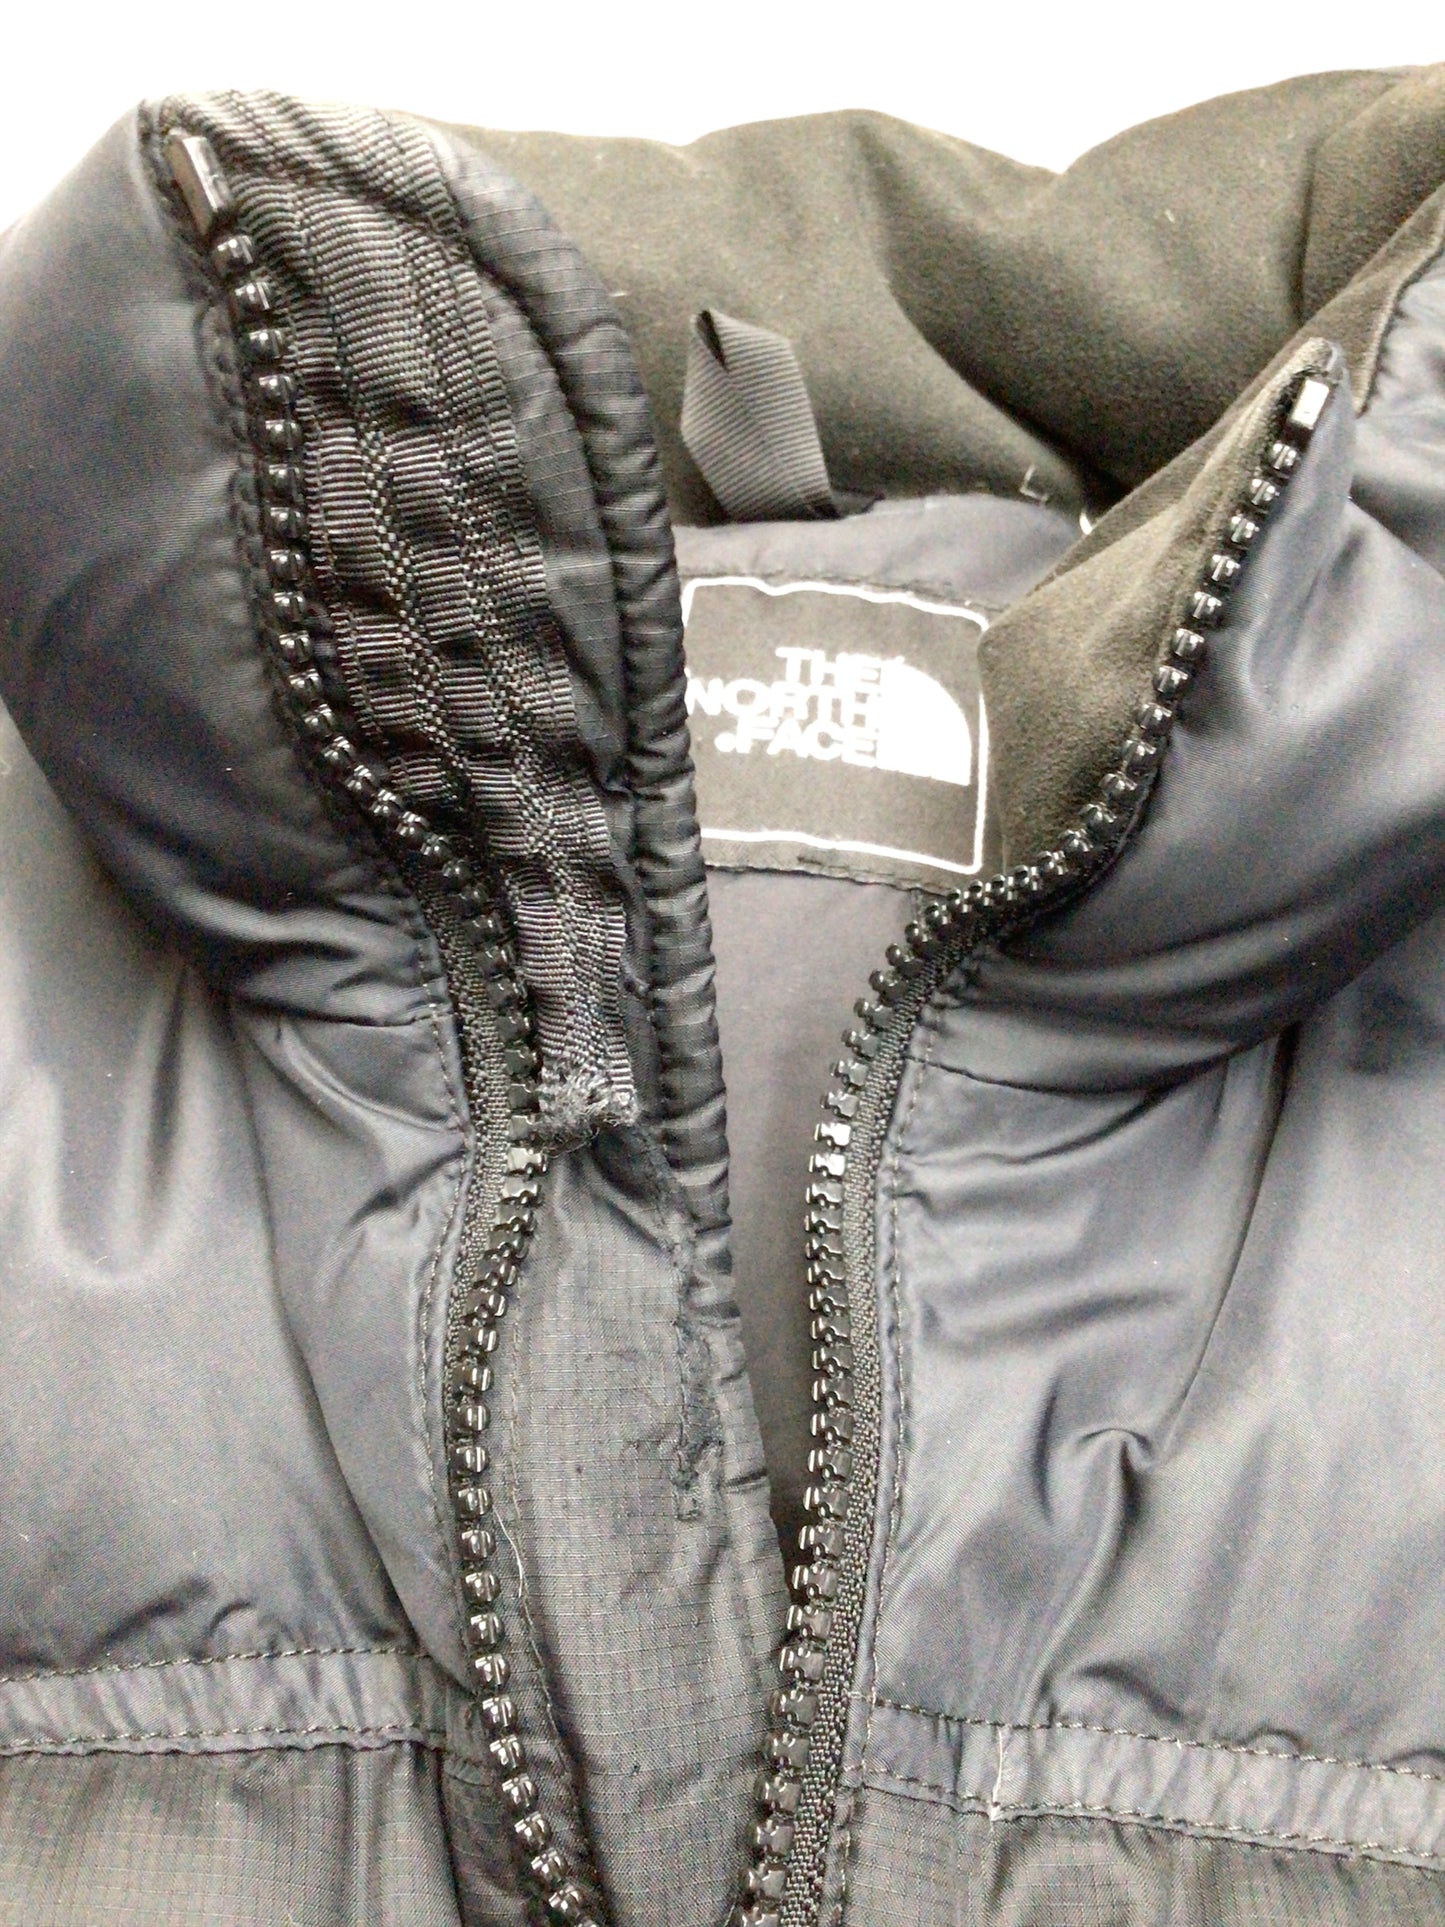 Coat Puffer & Quilted By North Face  Size: L